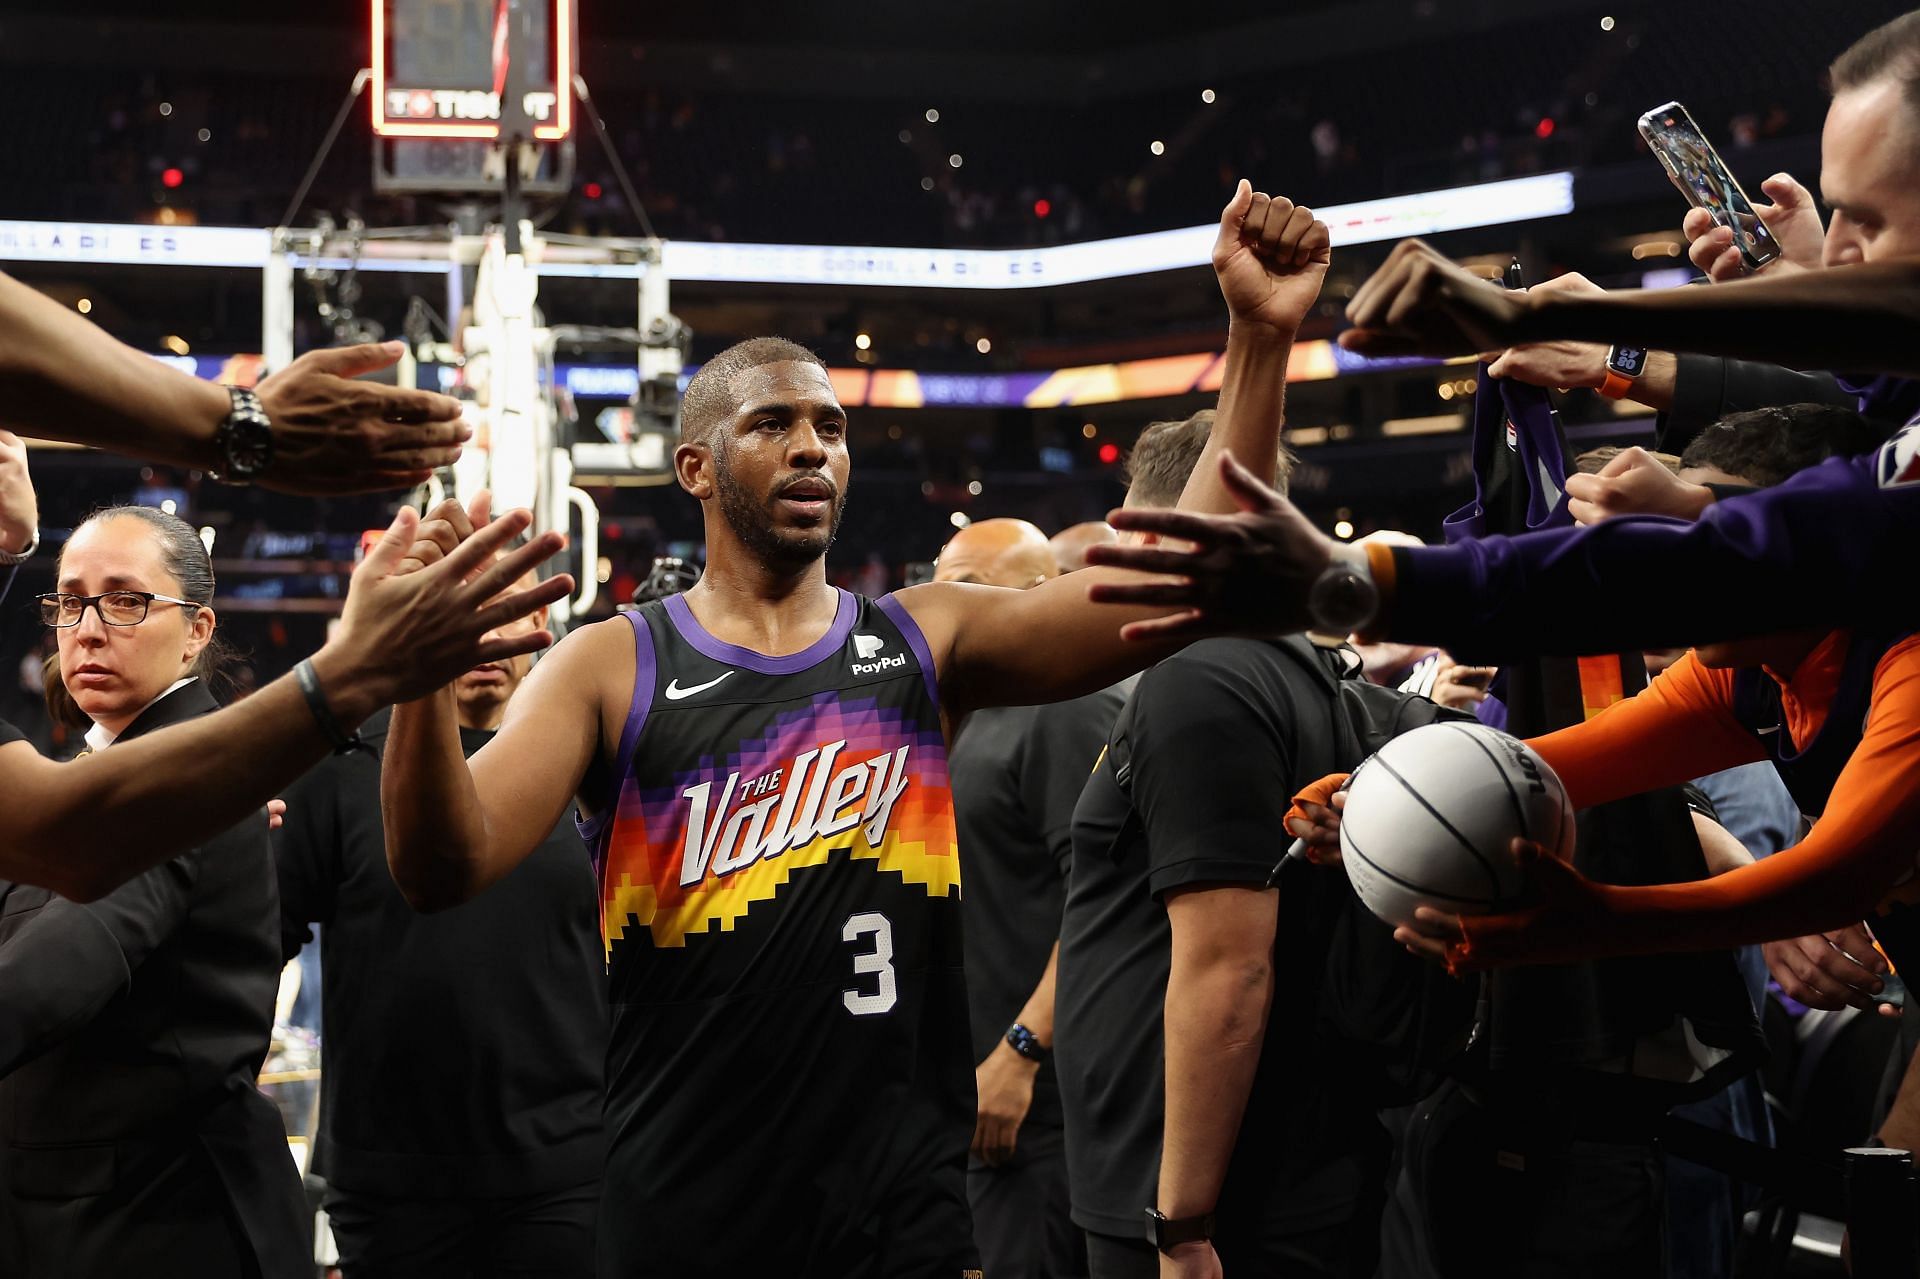 Chris Paul of the Phoenix Suns high fives fans after Game 1.